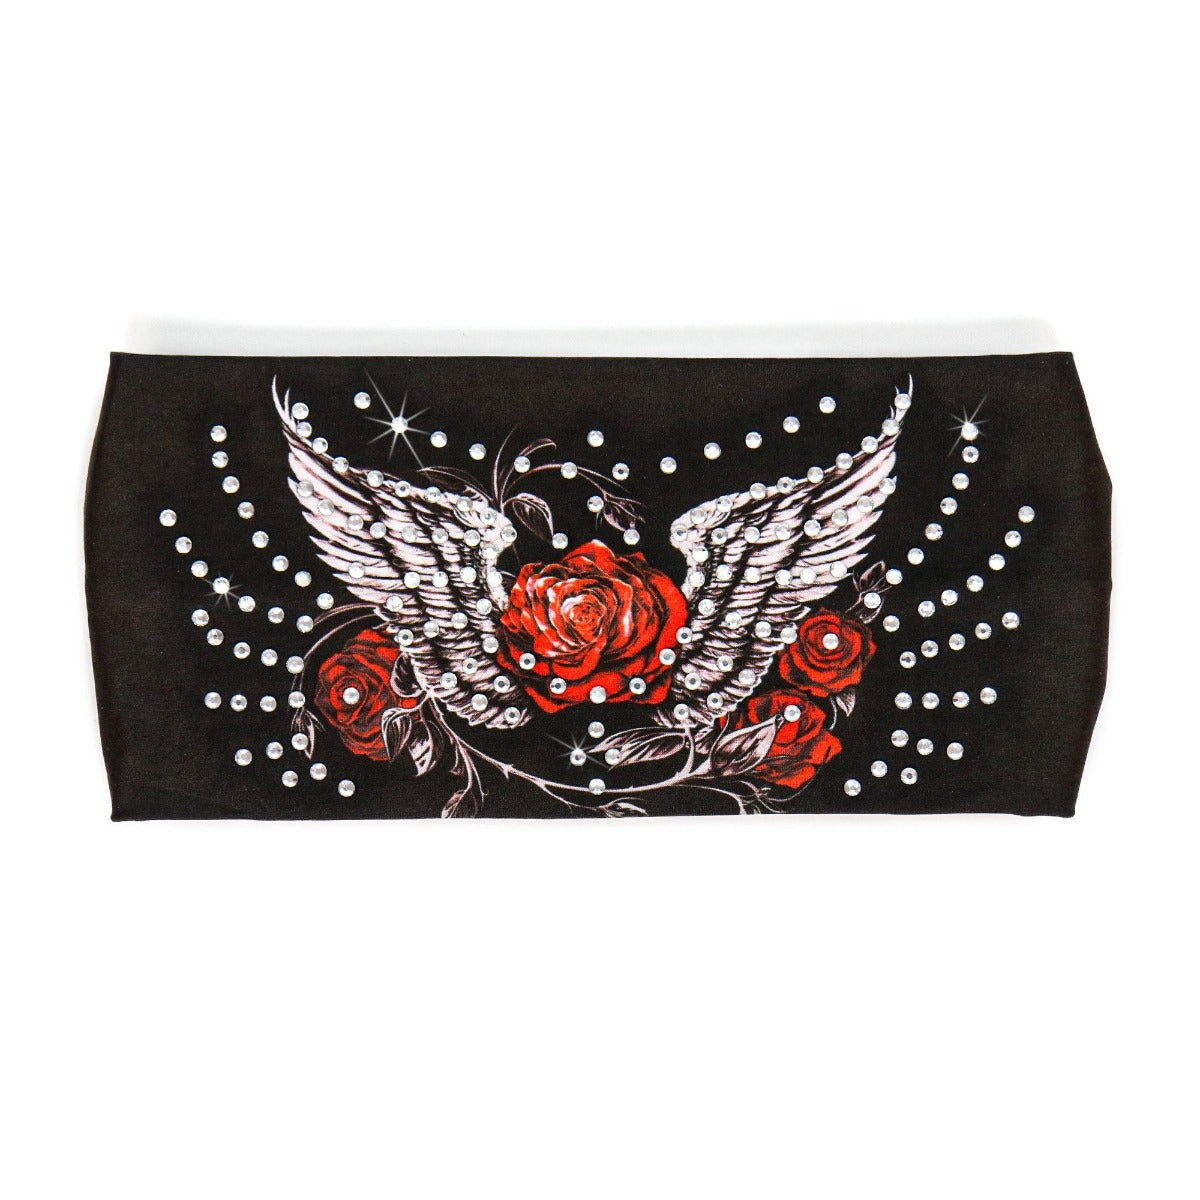 An elegant Hot Leathers Flying Rose Bandana Headband Wraps w/Rhinestones adorned with roses and delicate wings.